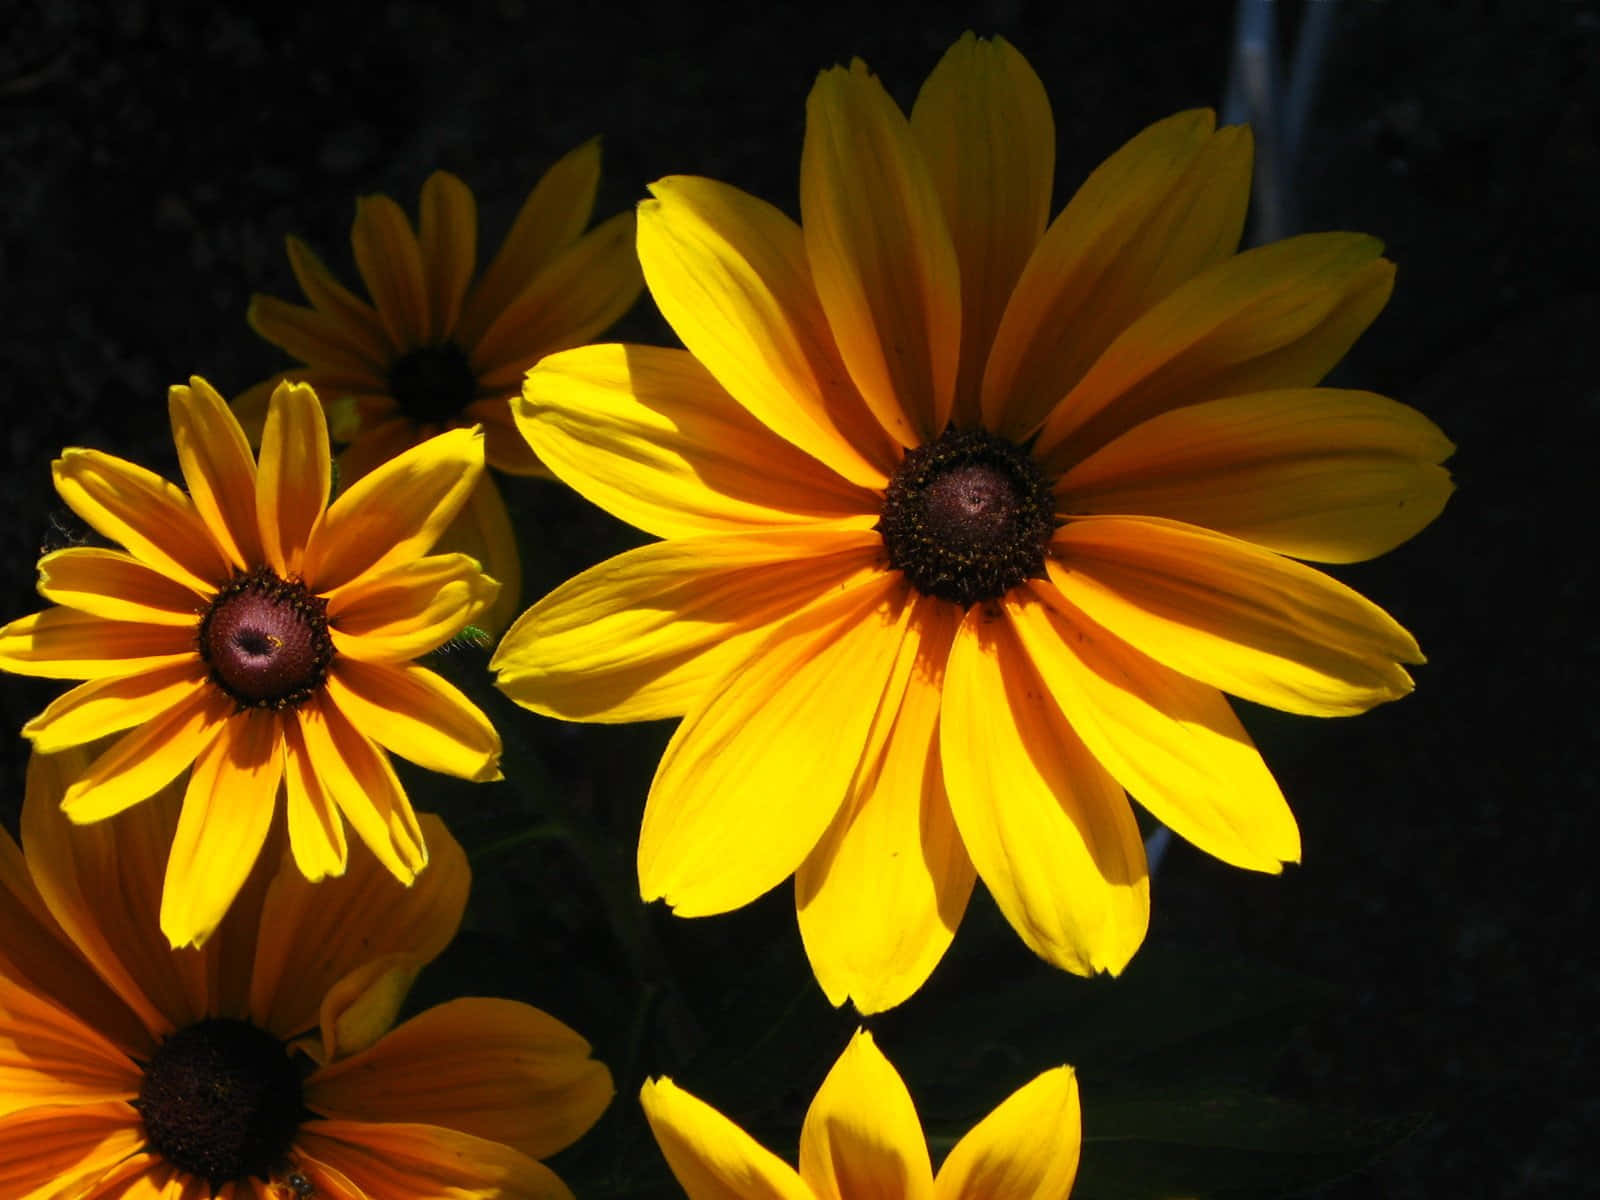 A vibrant Black Eyed Susan capture in a field of sunshine Wallpaper